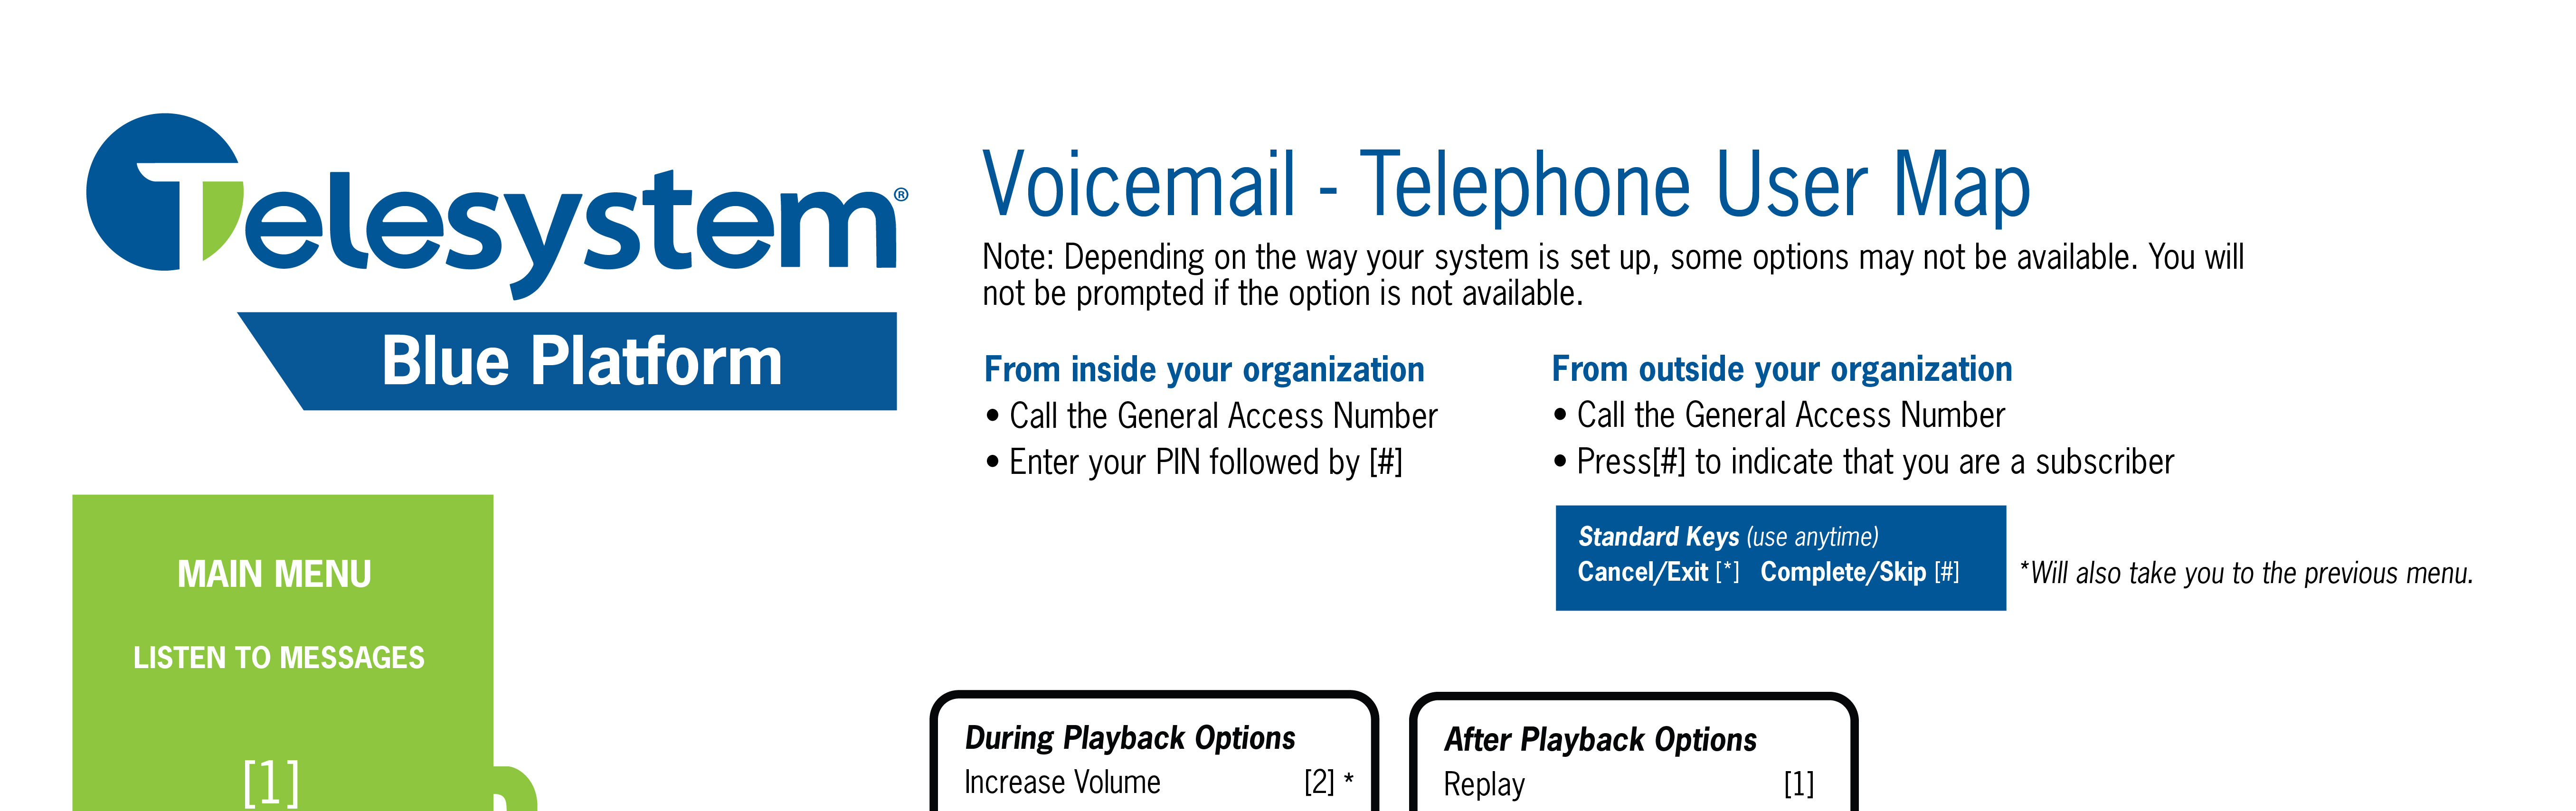 Voicemail - telephone user map